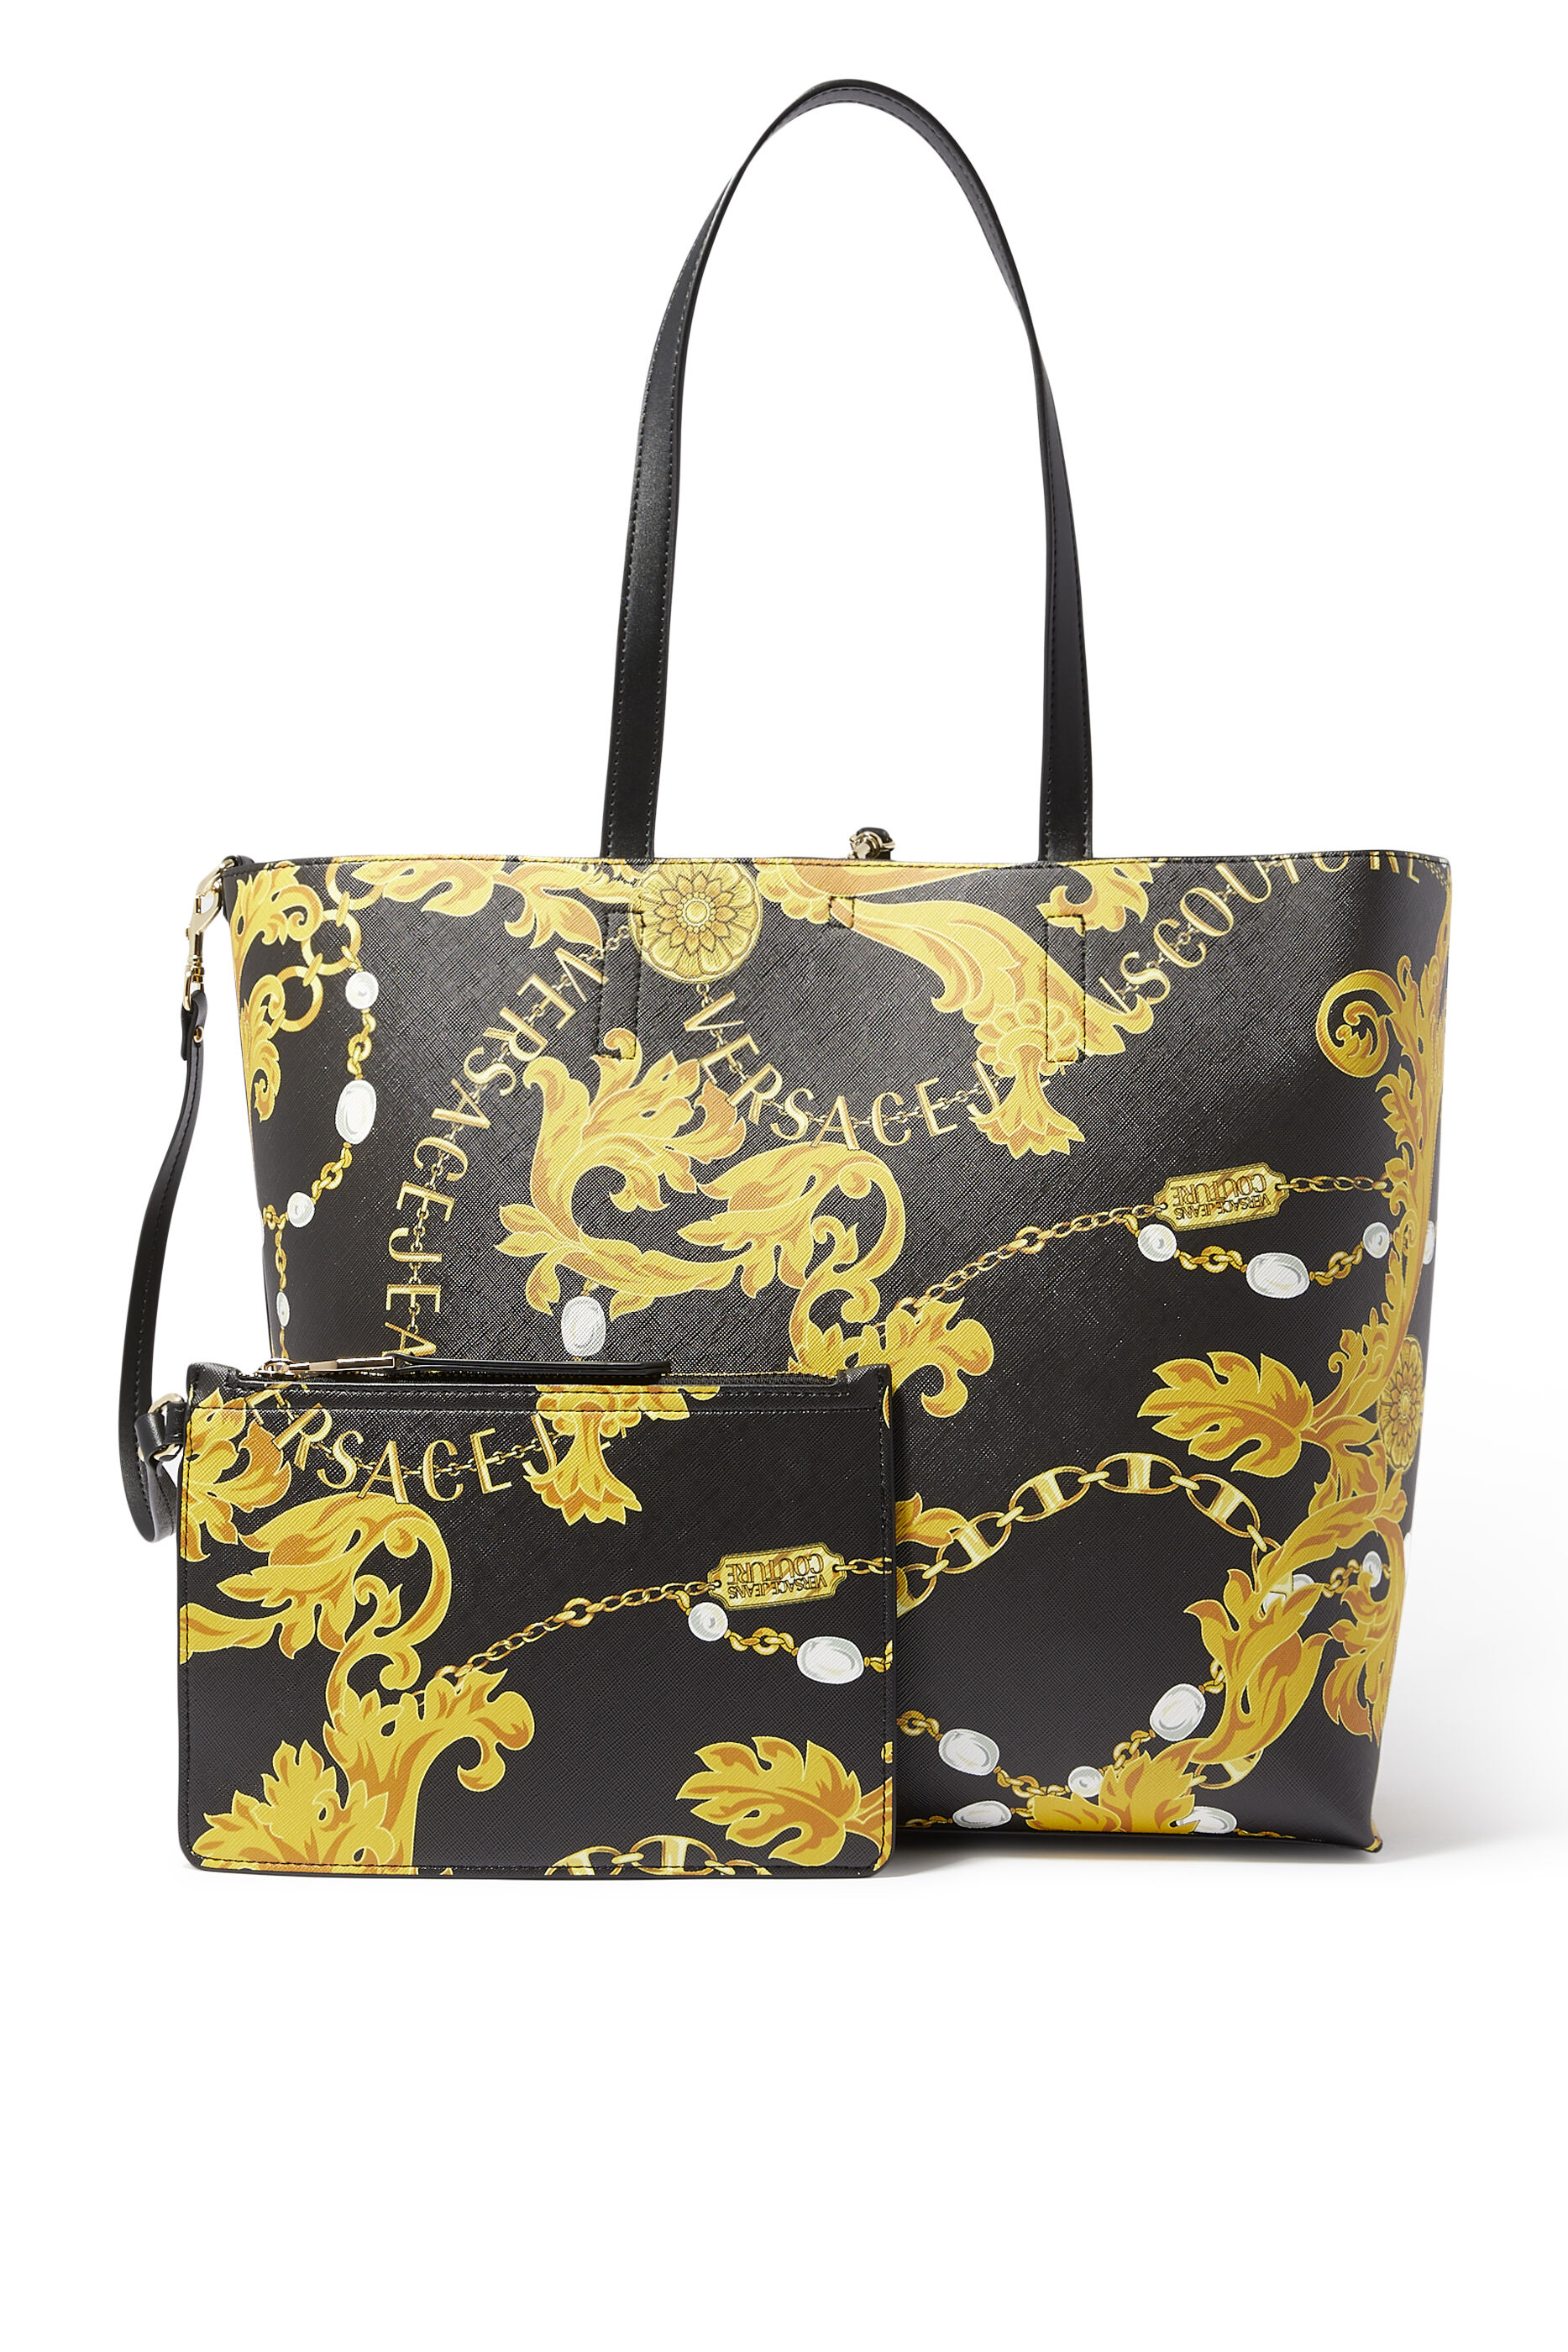 VERSACE Shoulder bags & pouches outlet - Women - 1800 products on sale |  FASHIOLA.co.uk